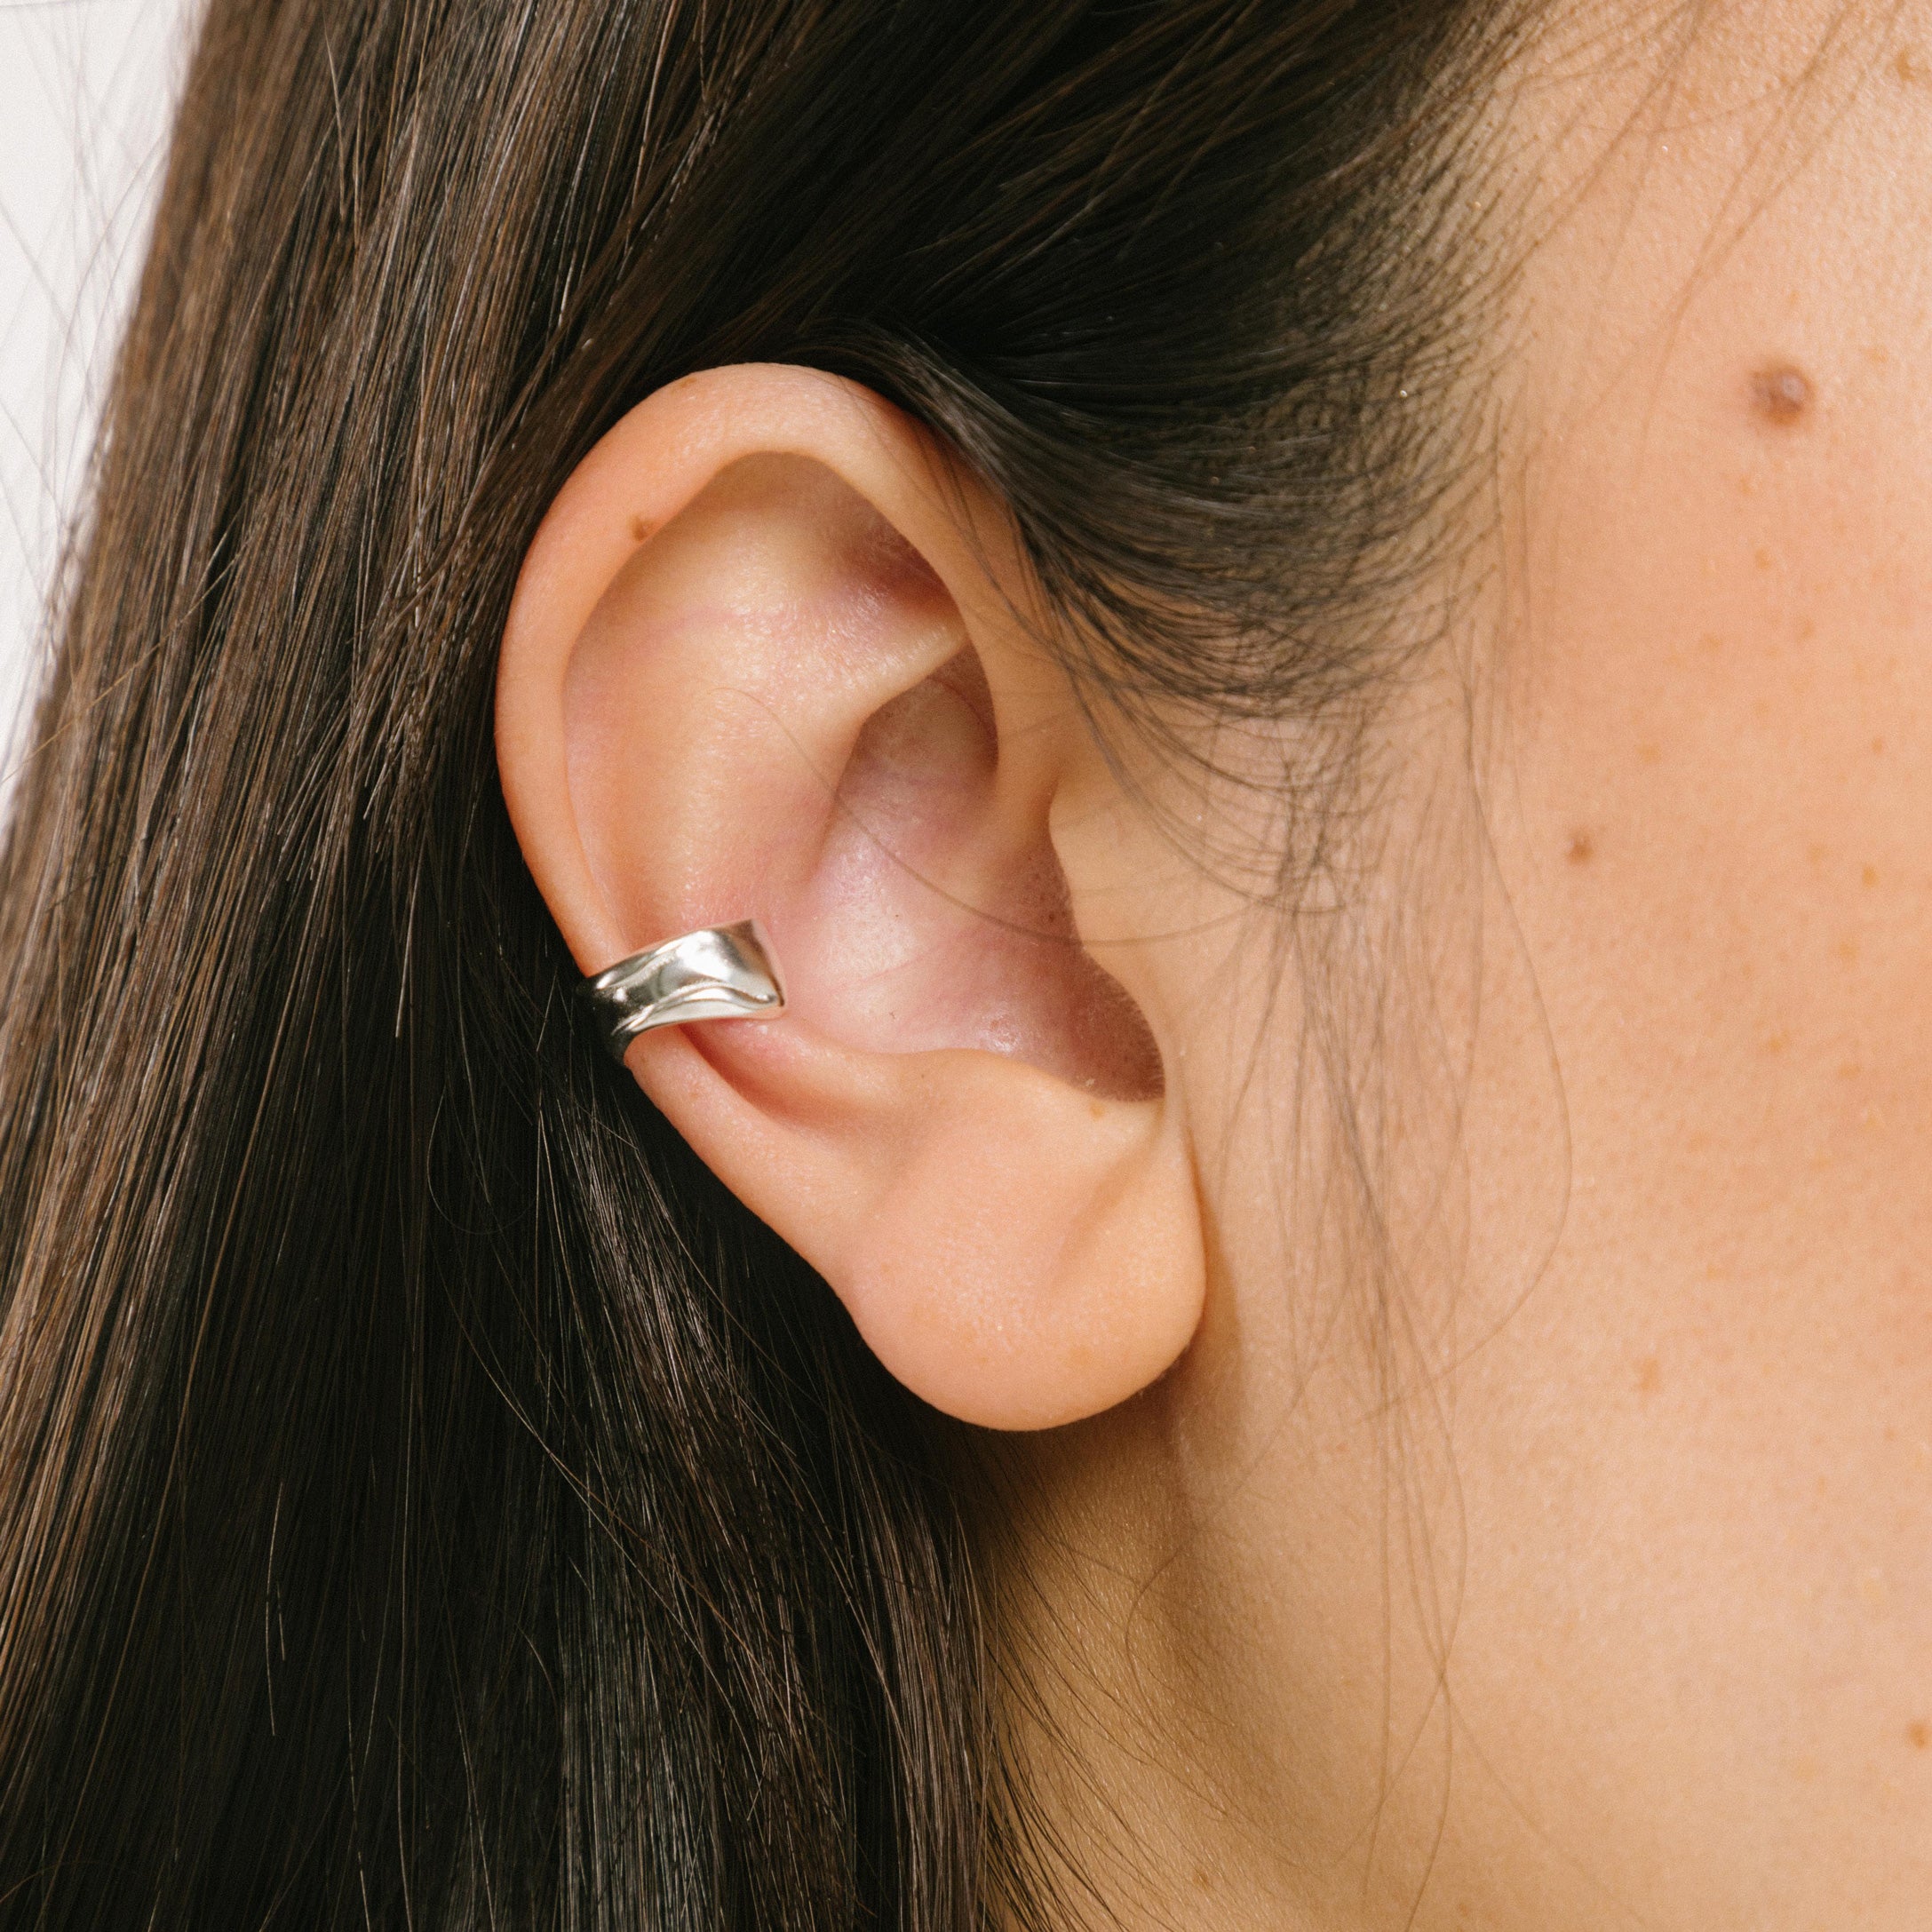 A model wearing the Aya Ear Cuff in Silver, made with 925 Sterling Silver for a timeless, luxurious style. Slip on these classy clip-on earrings to instantly elevate your look.